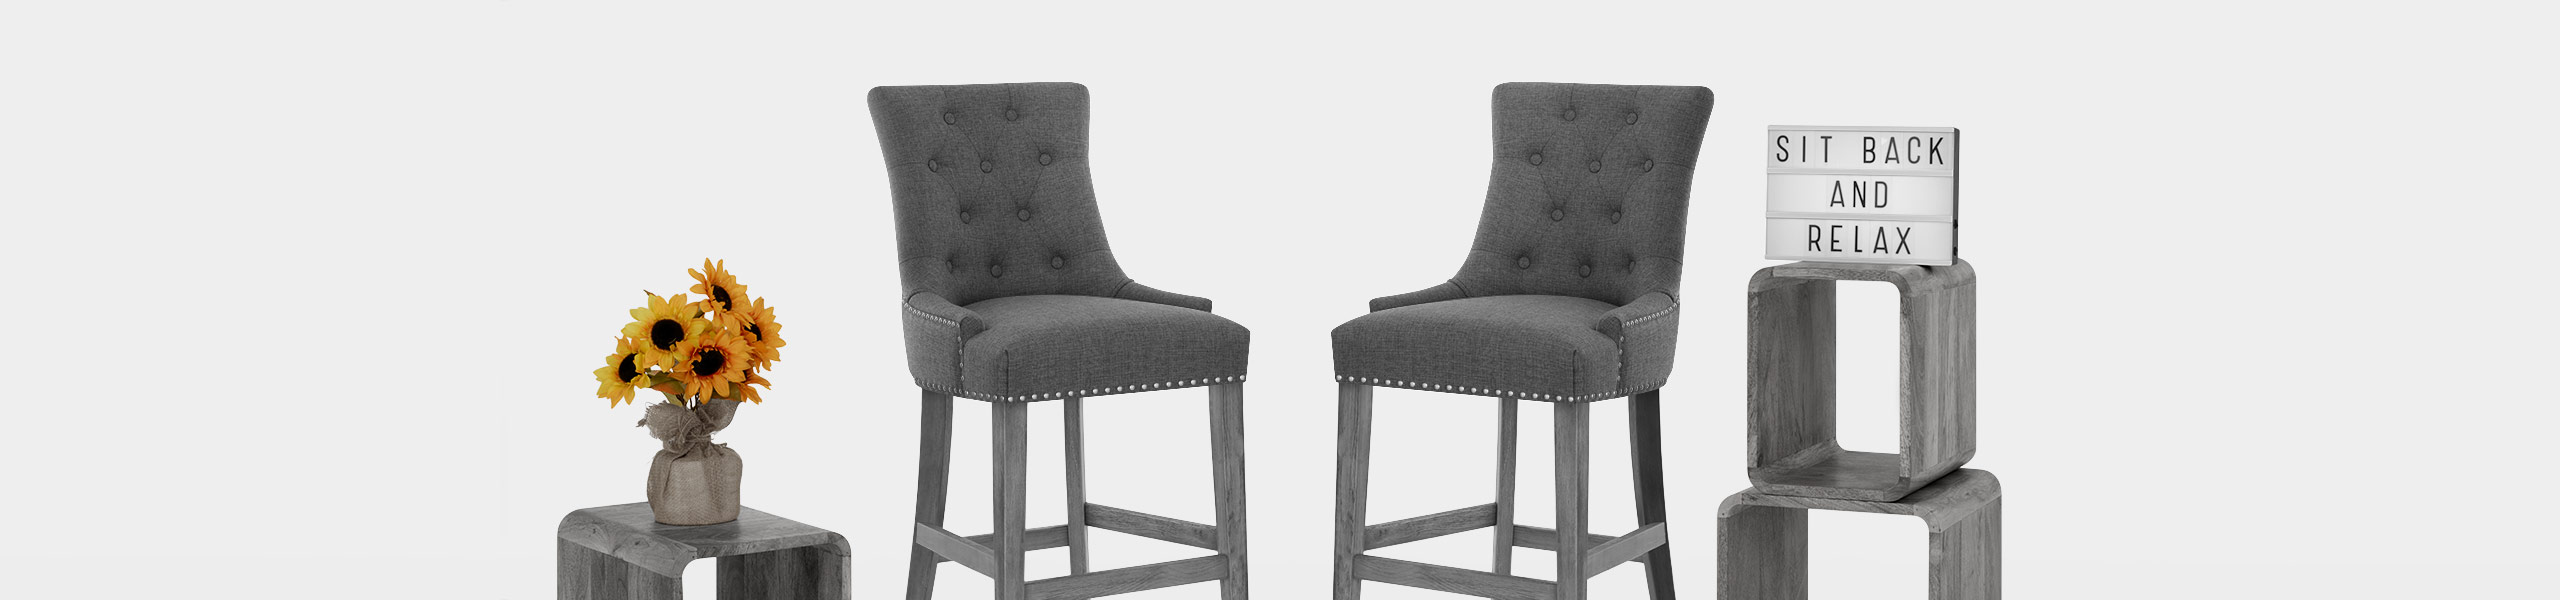 Etienne Bar Stool Charcoal Fabric Video Banner